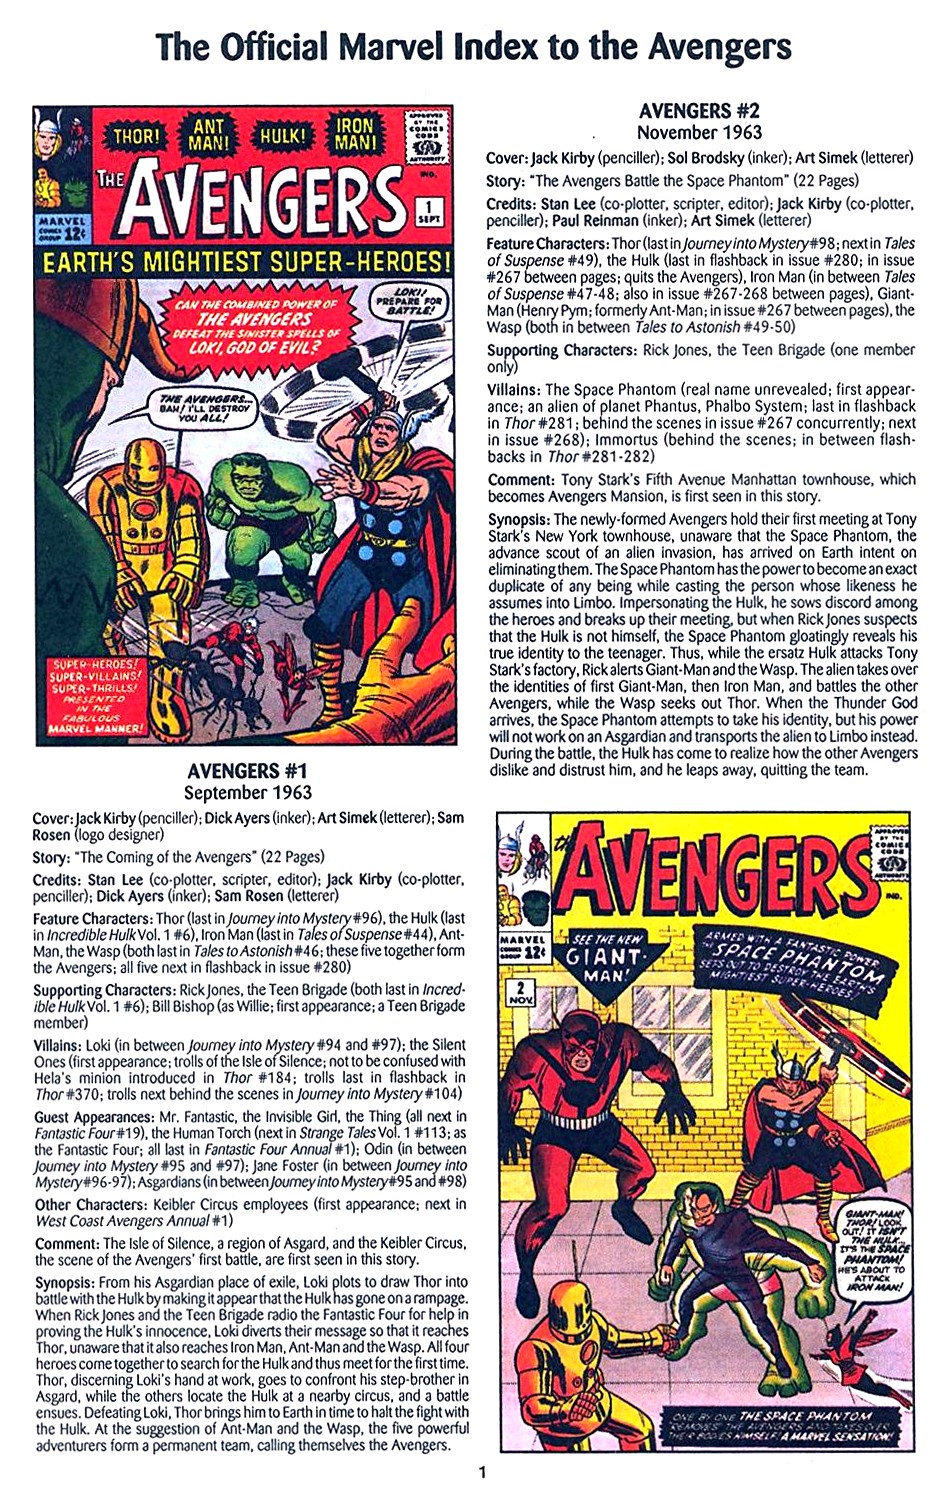 Read online The Official Marvel Index to the Avengers comic -  Issue #1 - 3